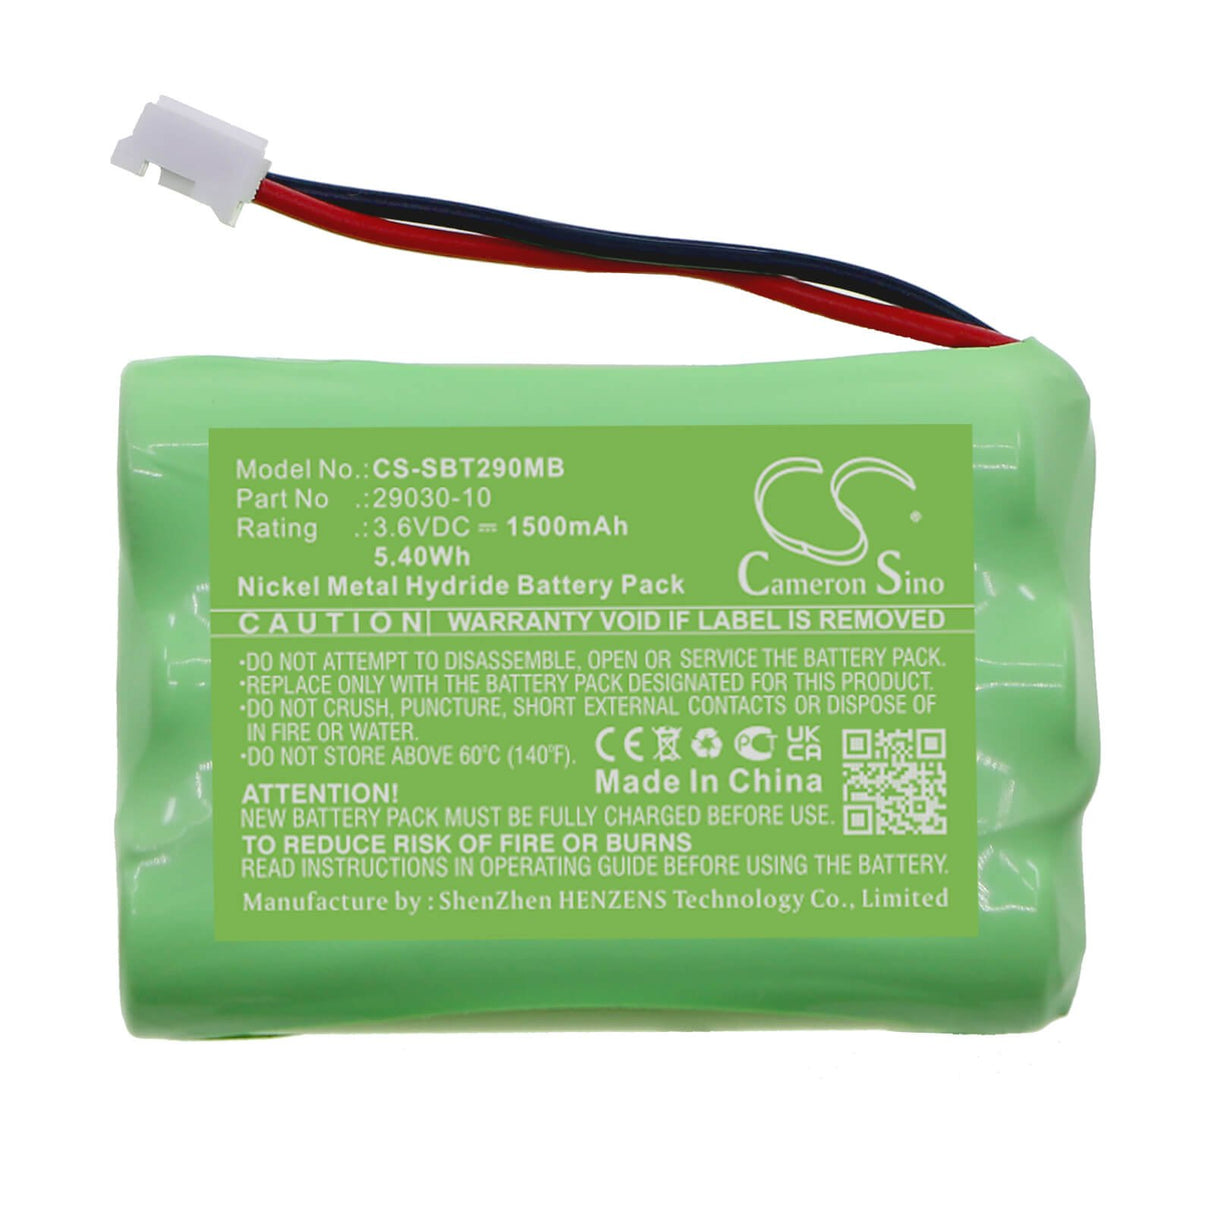 3.6v, Ni-mh, 1500mah, Battery Fits Summer, 285650a, 28650, 5.40wh Batteries for Electronics Cameron Sino Technology Limited   